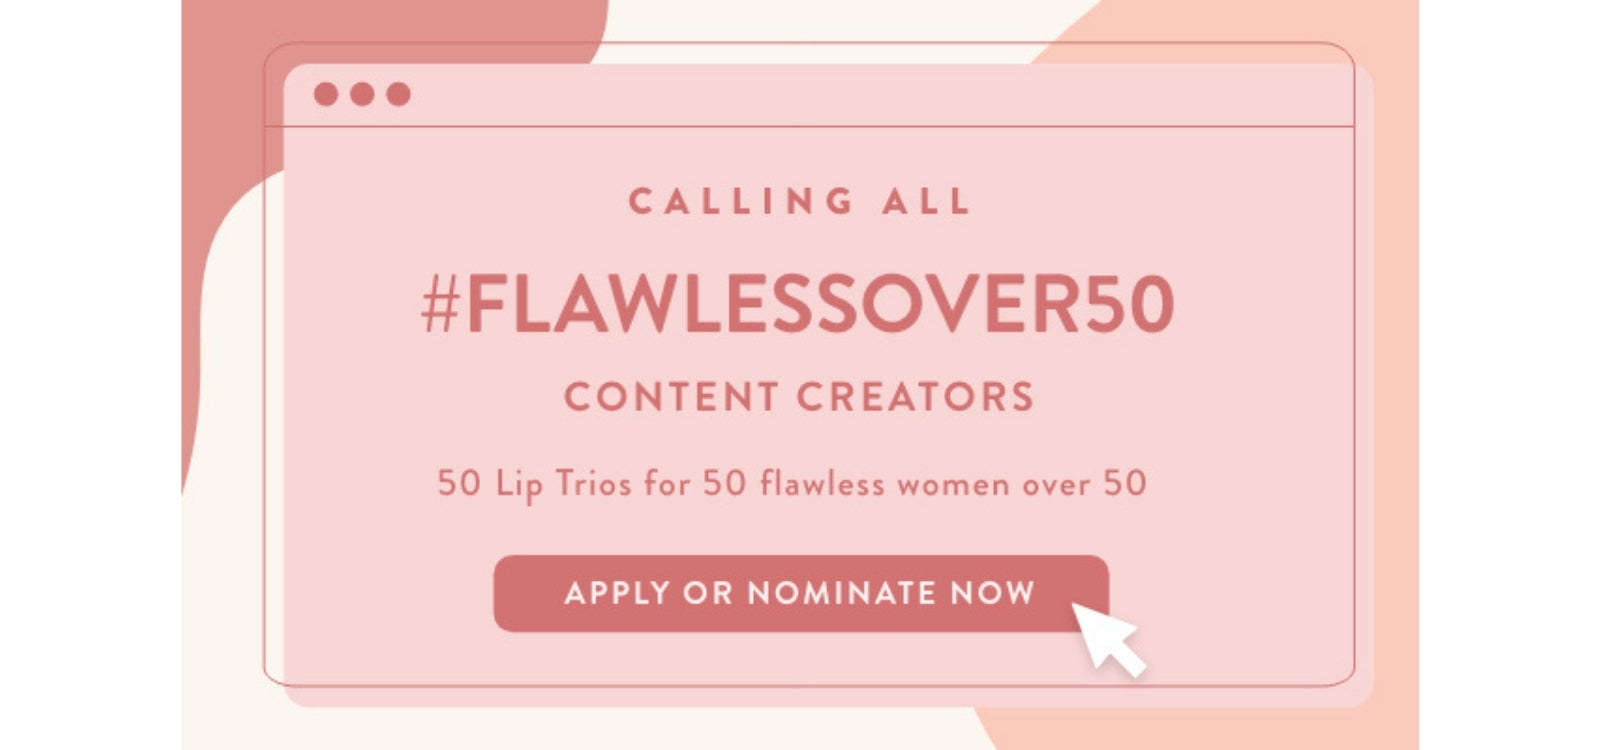 #FLAWLESSOVER50 CONTENT CREATORS - APPLY NOW!